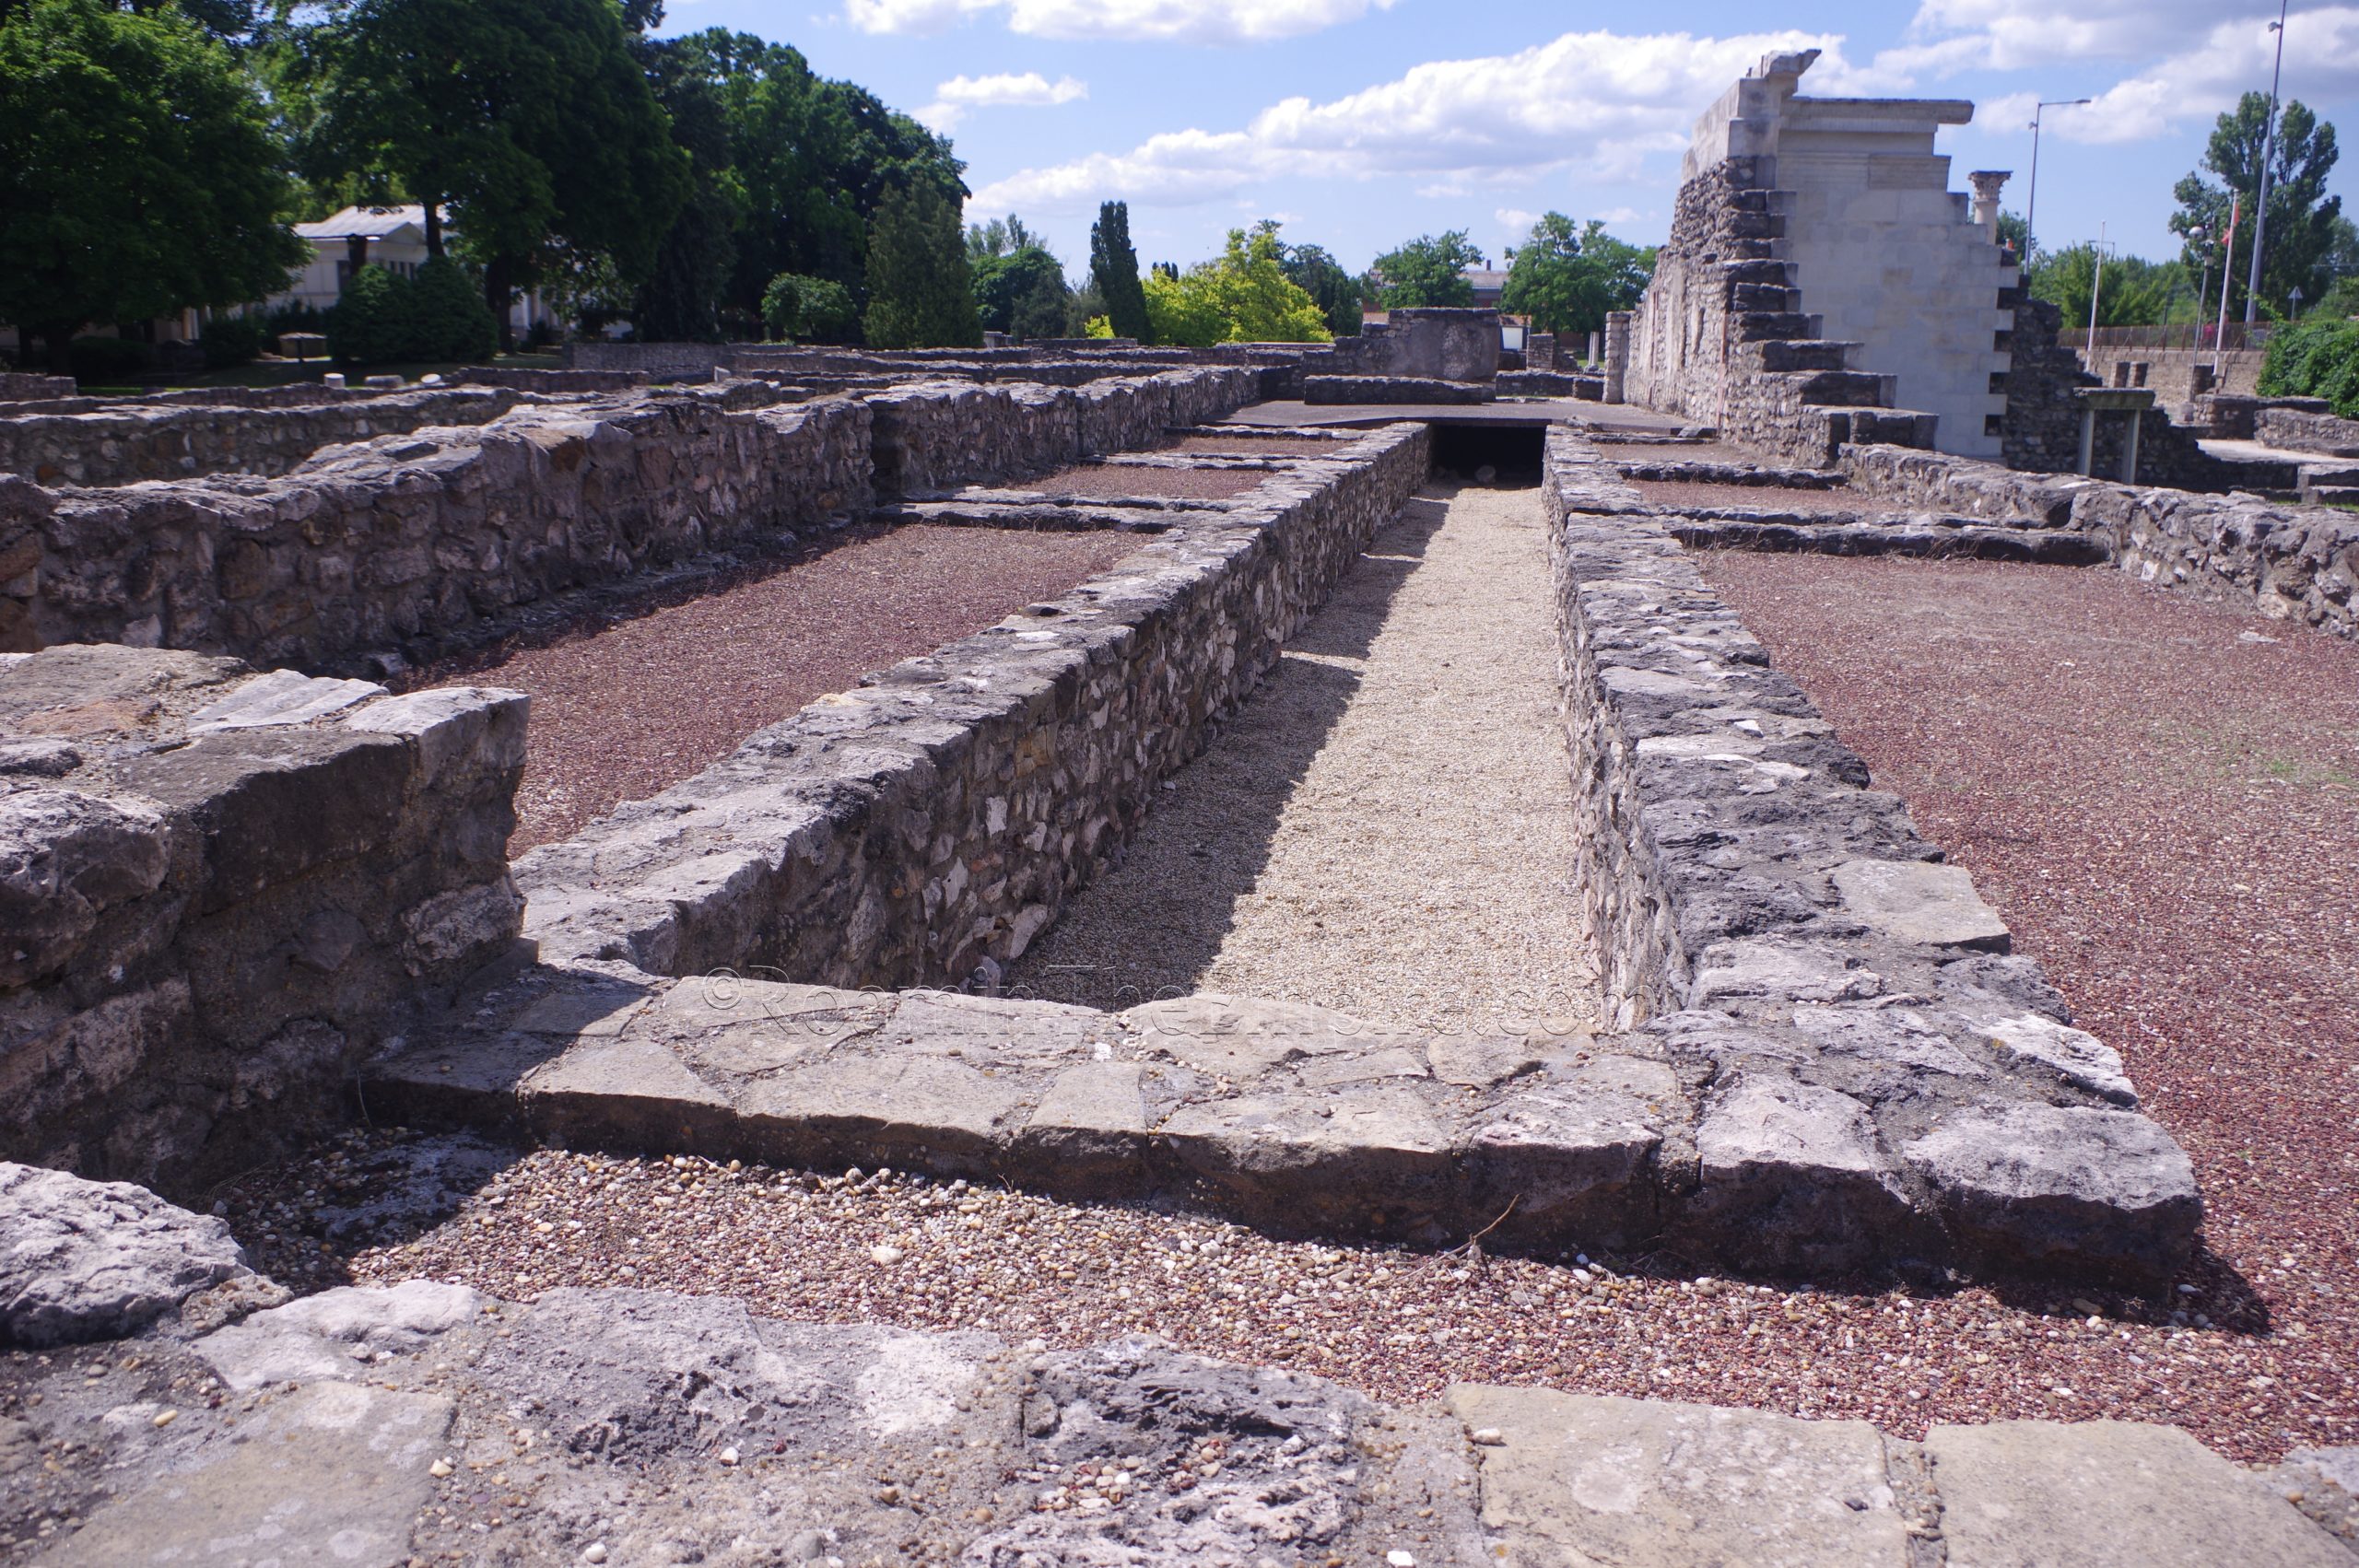 Curia with channels for the hypocaust heating system.